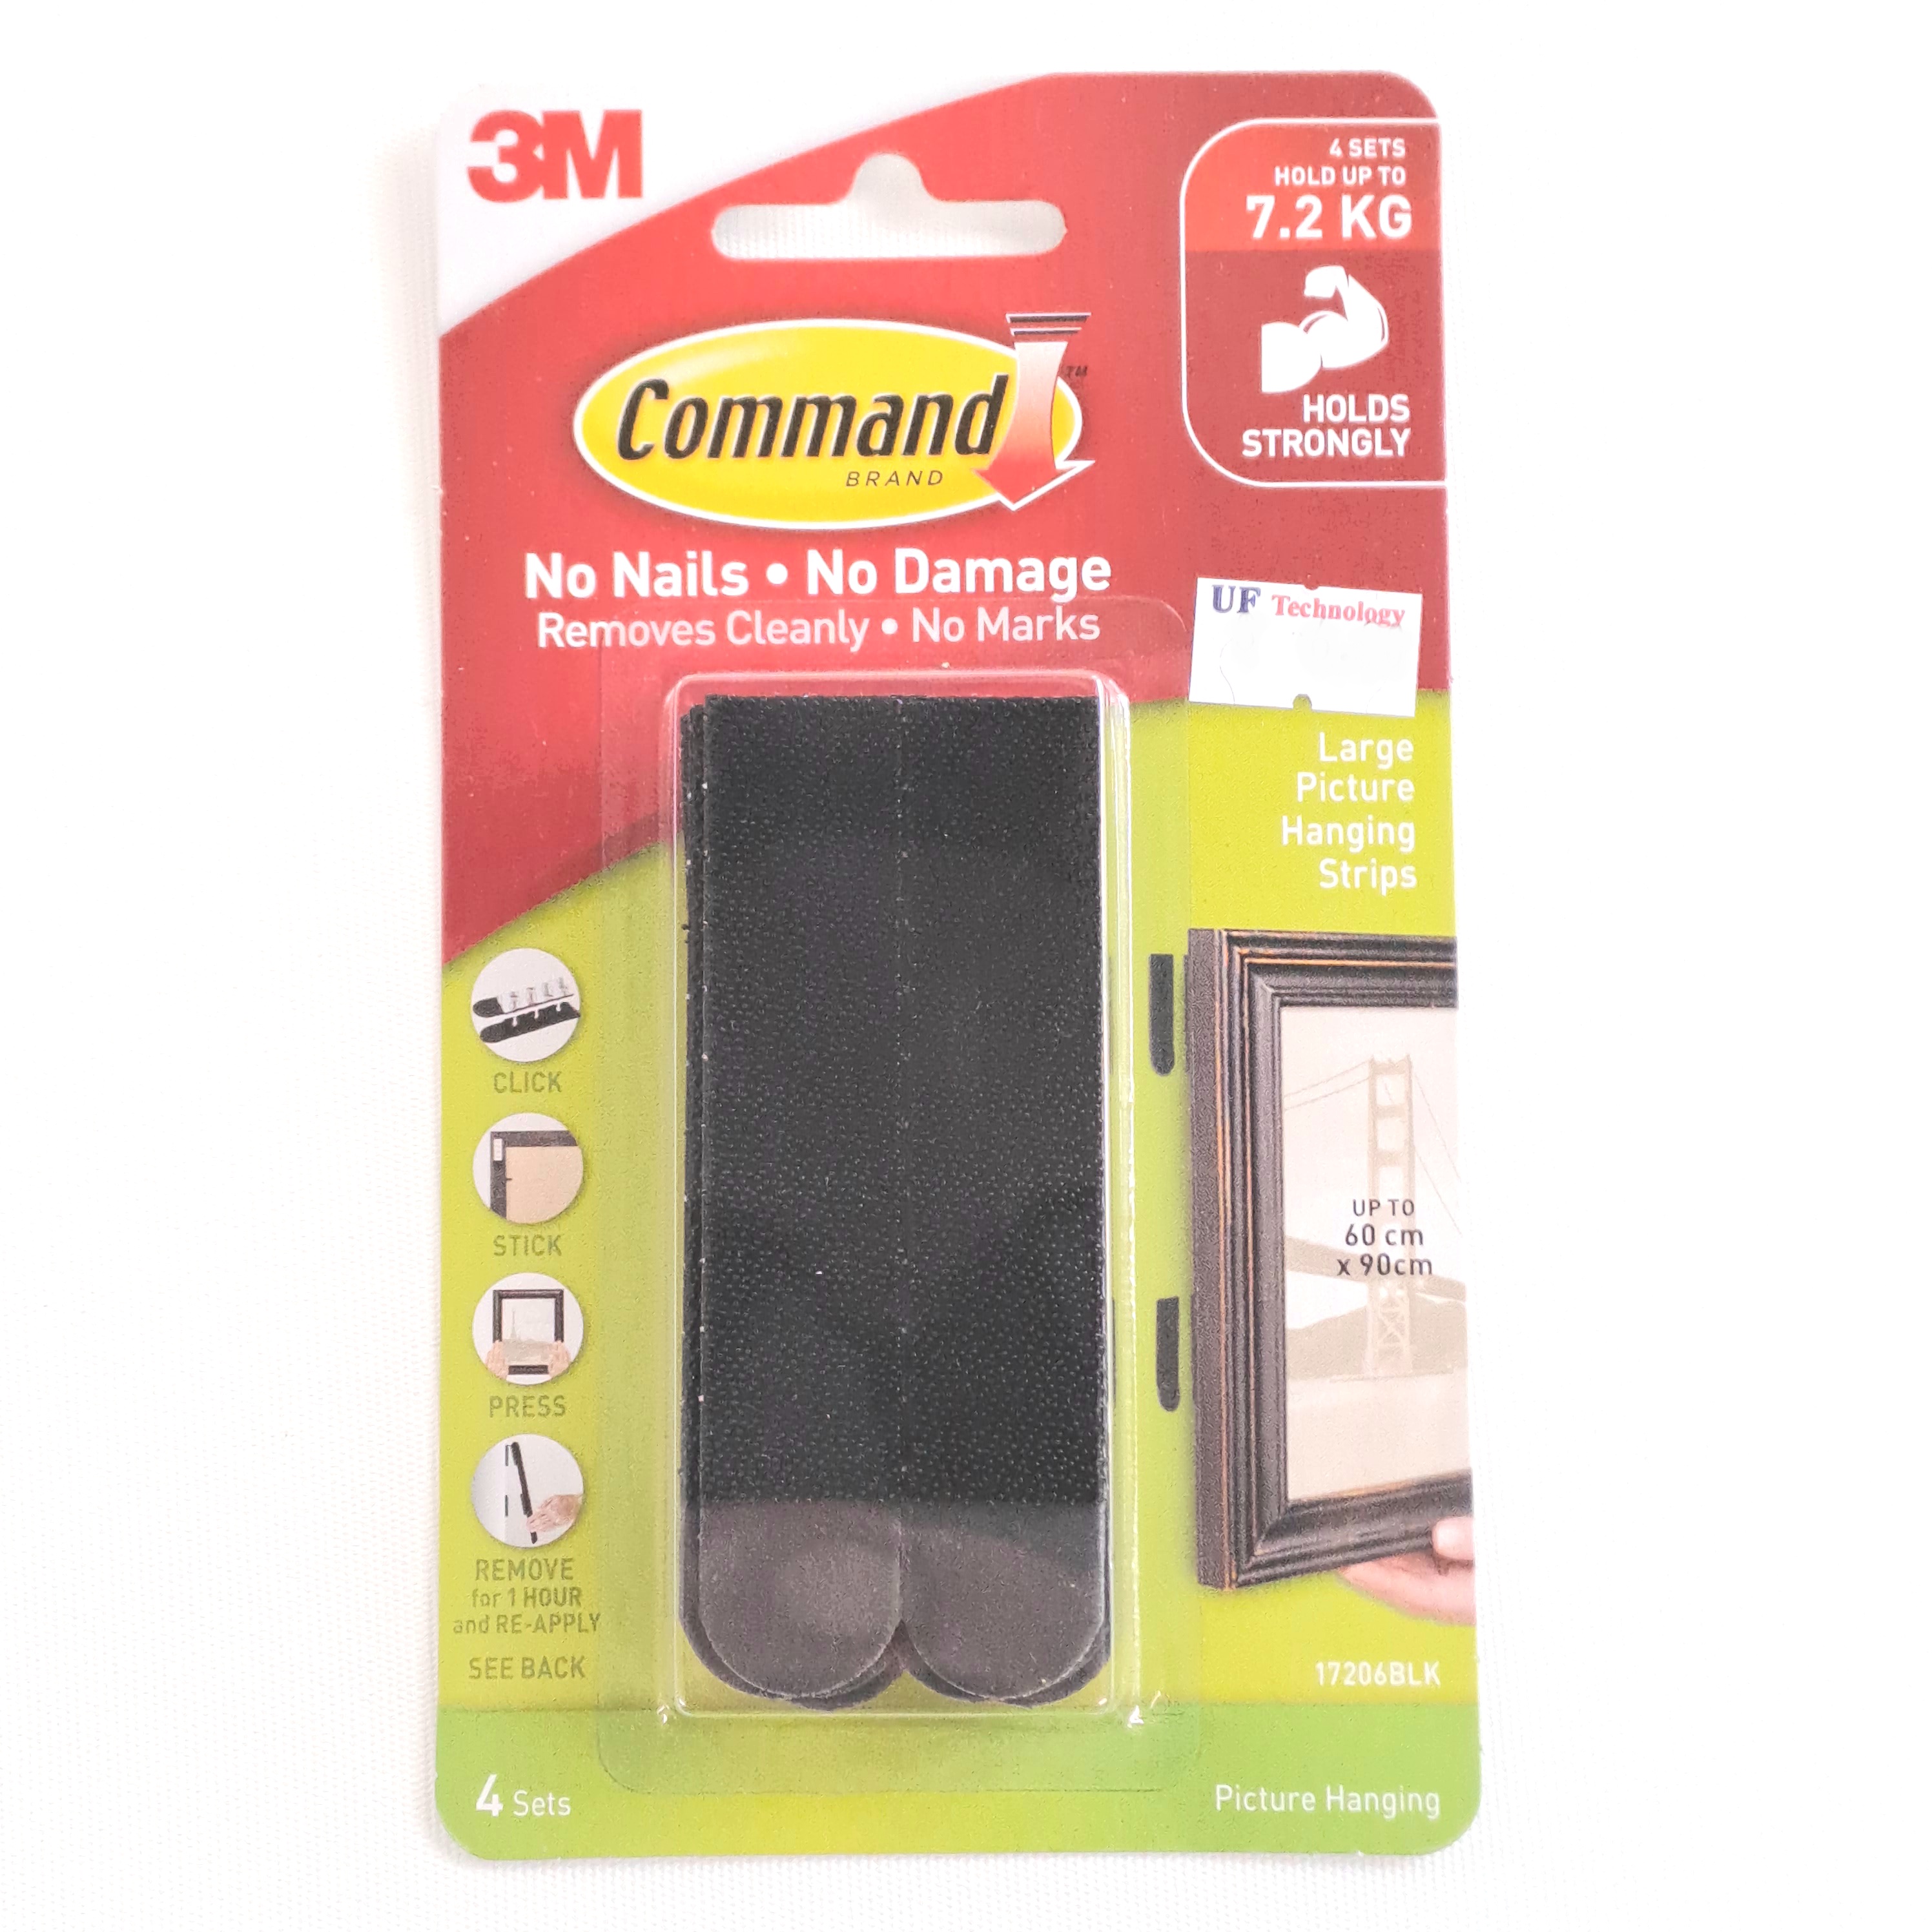 3M Command Black Large Picture Hanging Strips 4 Sets